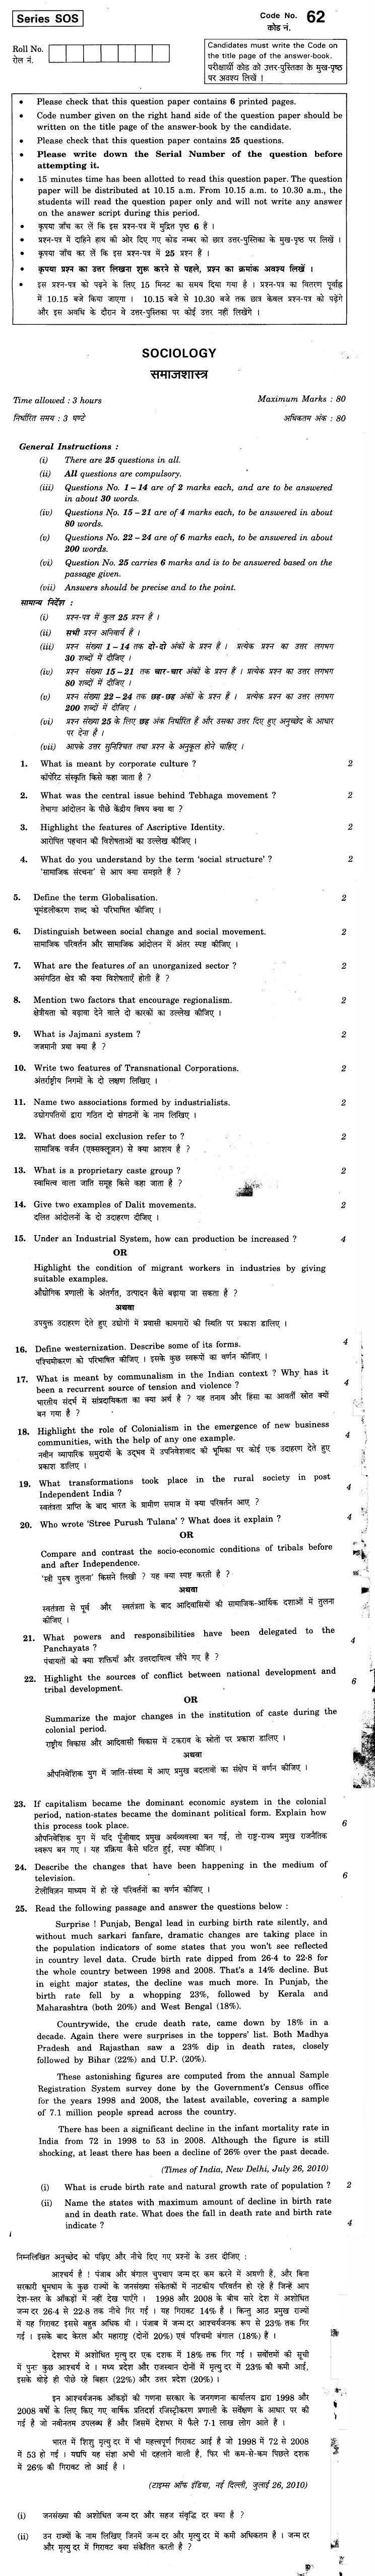 CBSE Class XII Previous Year Question Papers 2011 Sociology